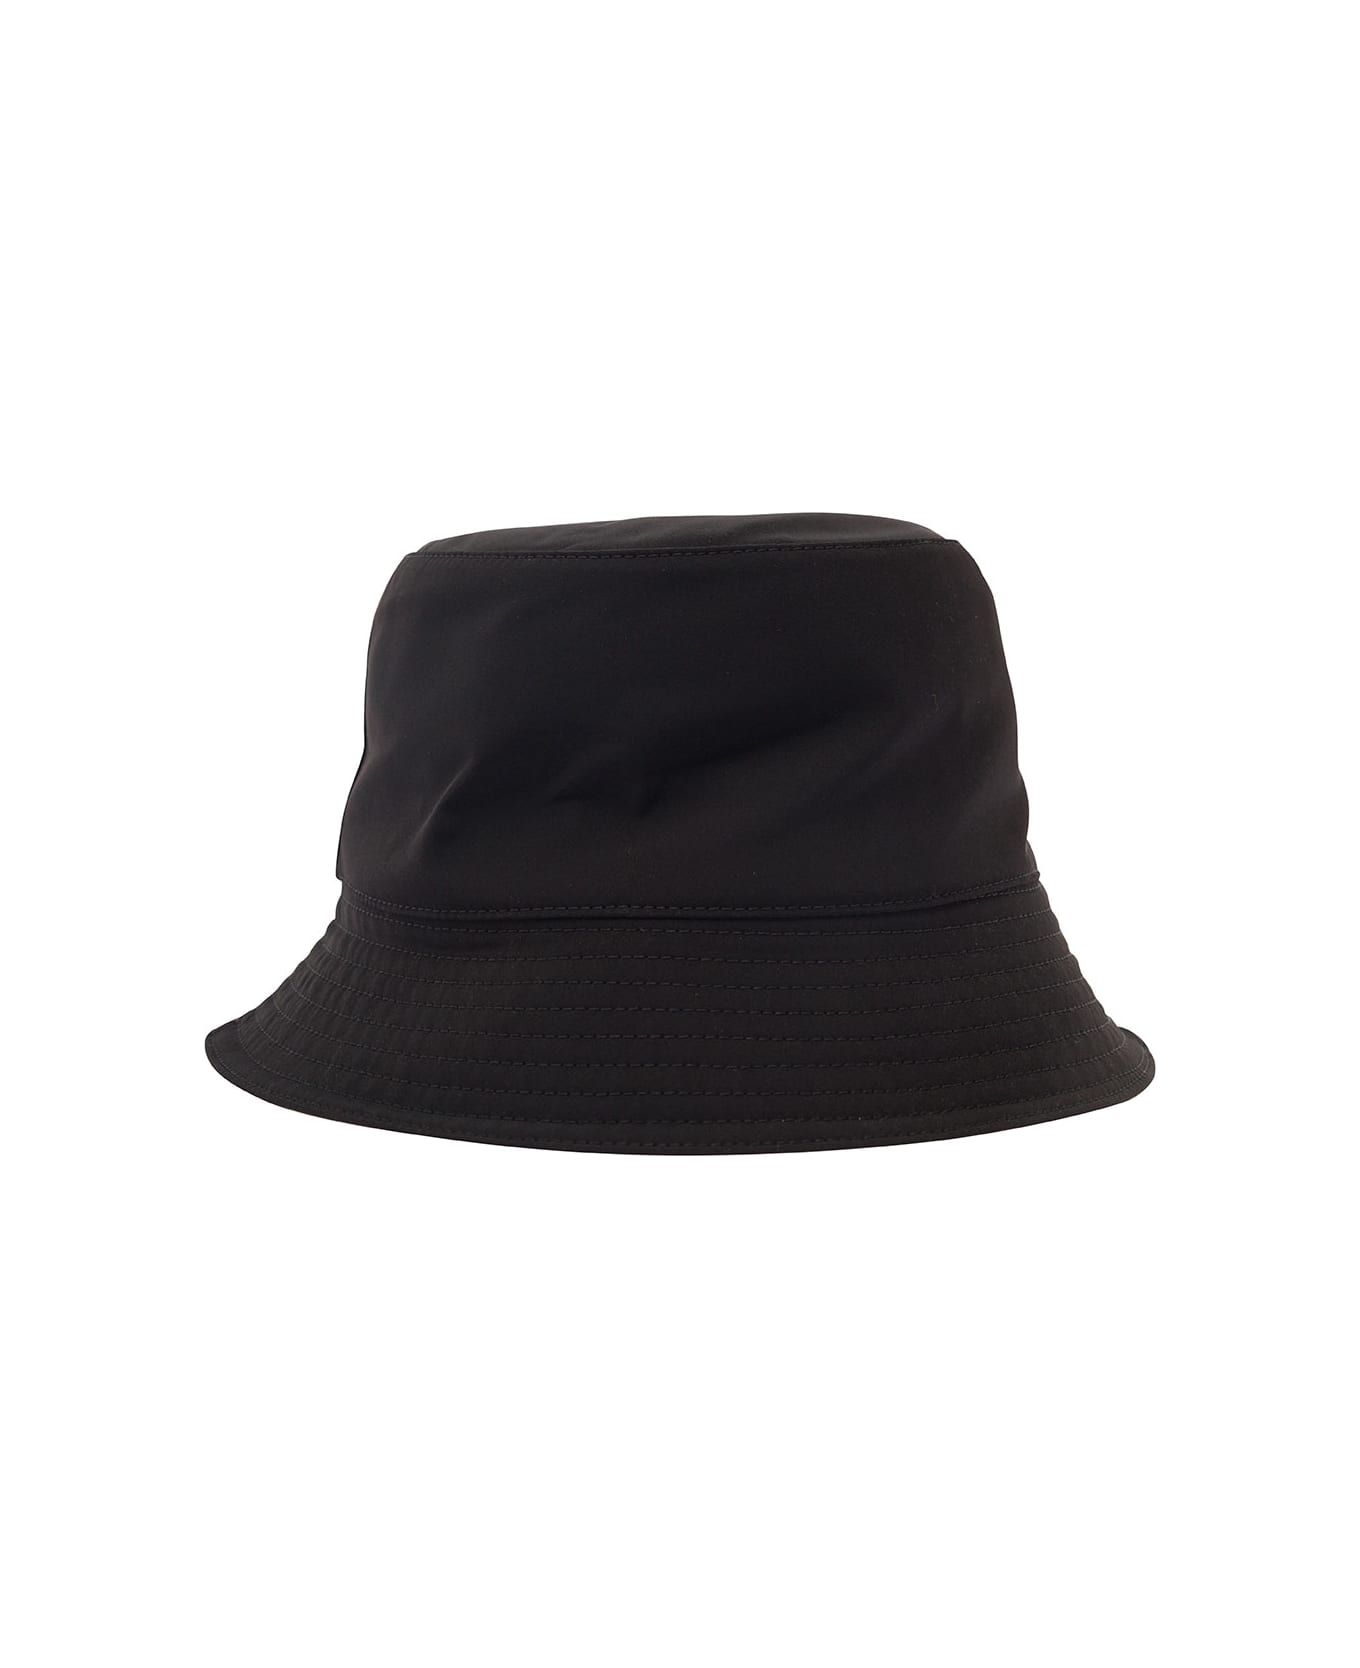 Alexander McQueen Black And White Reversible Bucket Hat With Logo Embroidery In Polyamide Man - Black 帽子